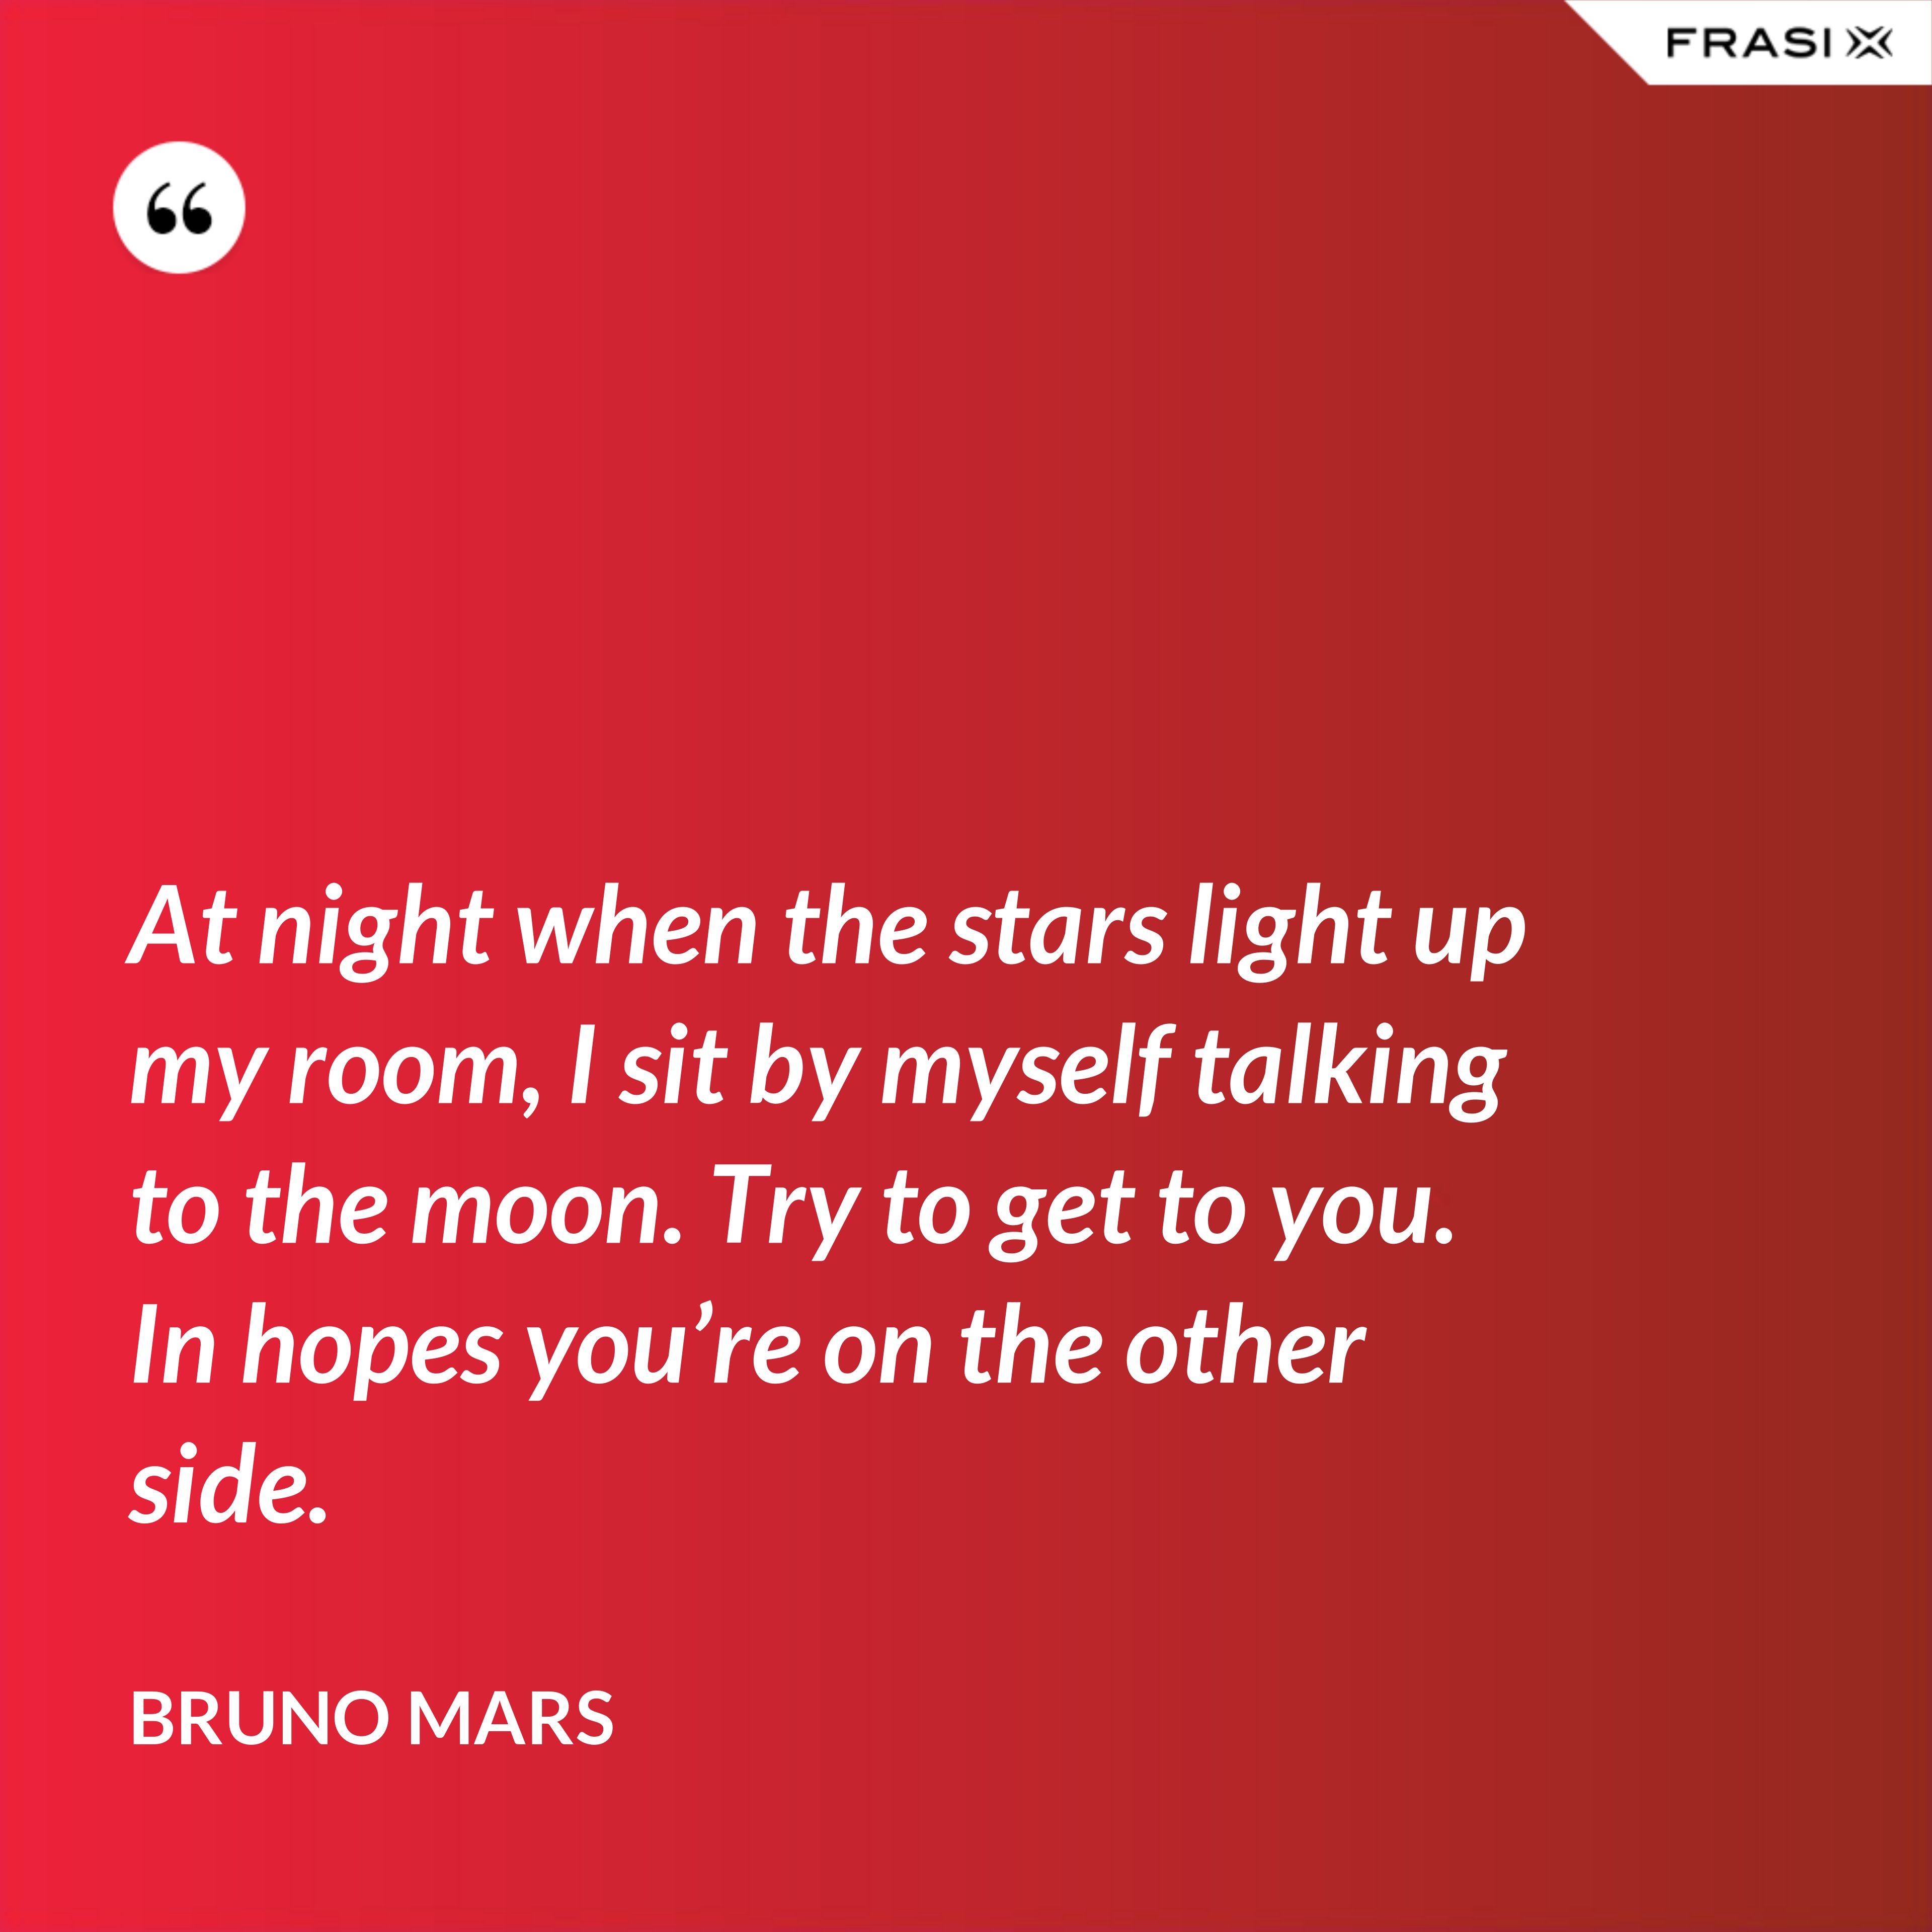 At night when the stars light up my room, I sit by myself talking to the moon. Try to get to you. In hopes you’re on the other side. - Bruno Mars